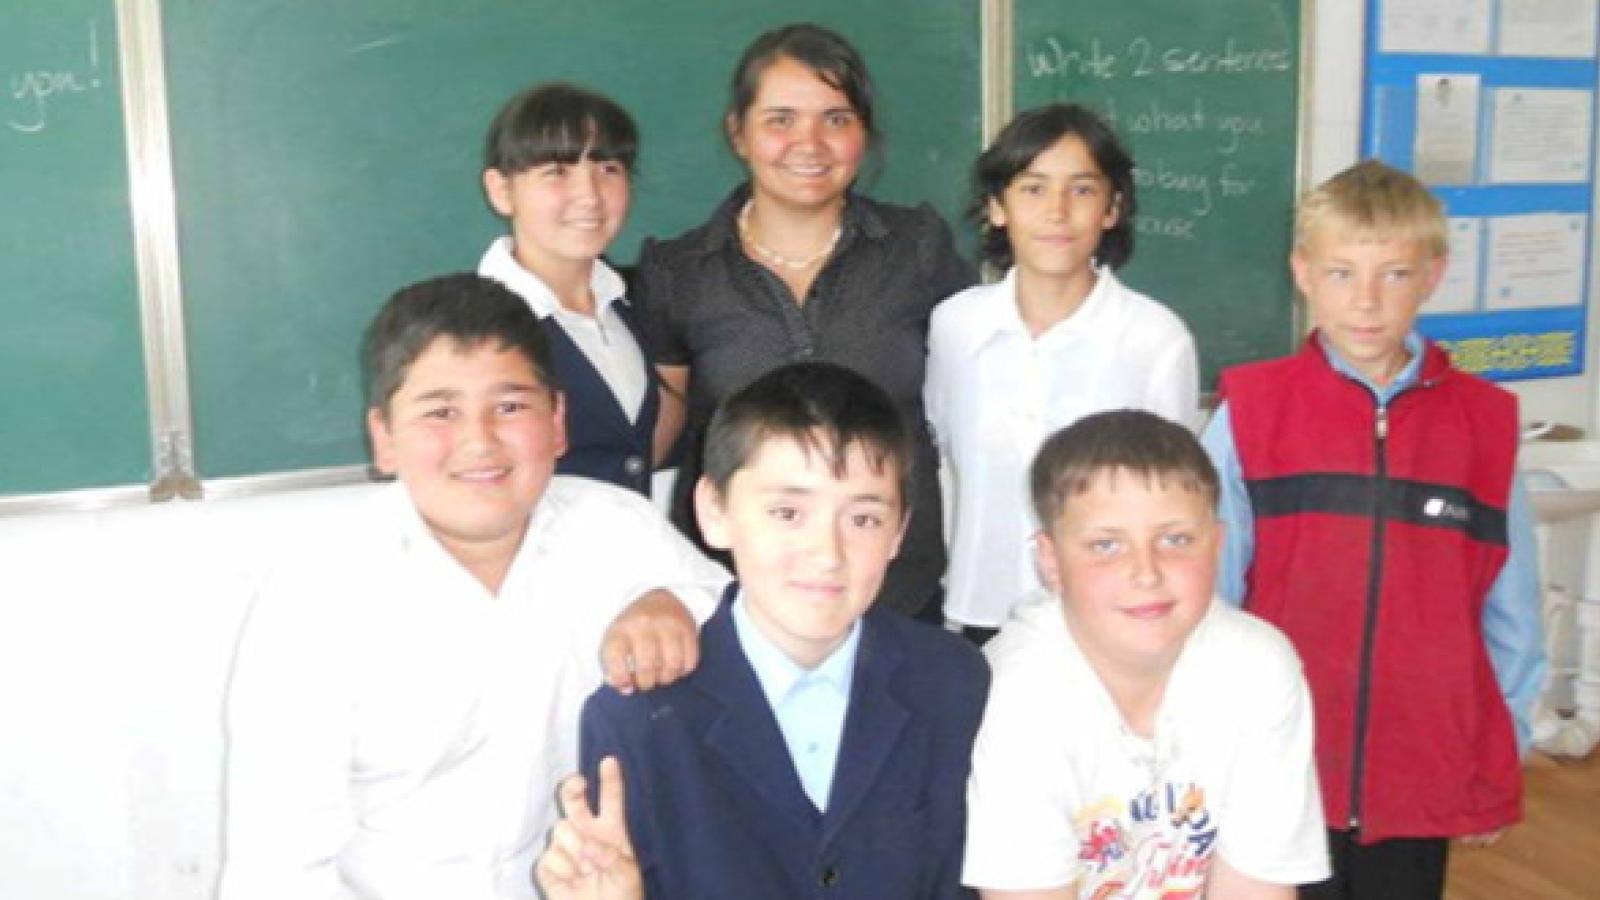 Catherine (back row second from left) with a few of her students at the elementary school in Zhitikara, Kazakhstan.